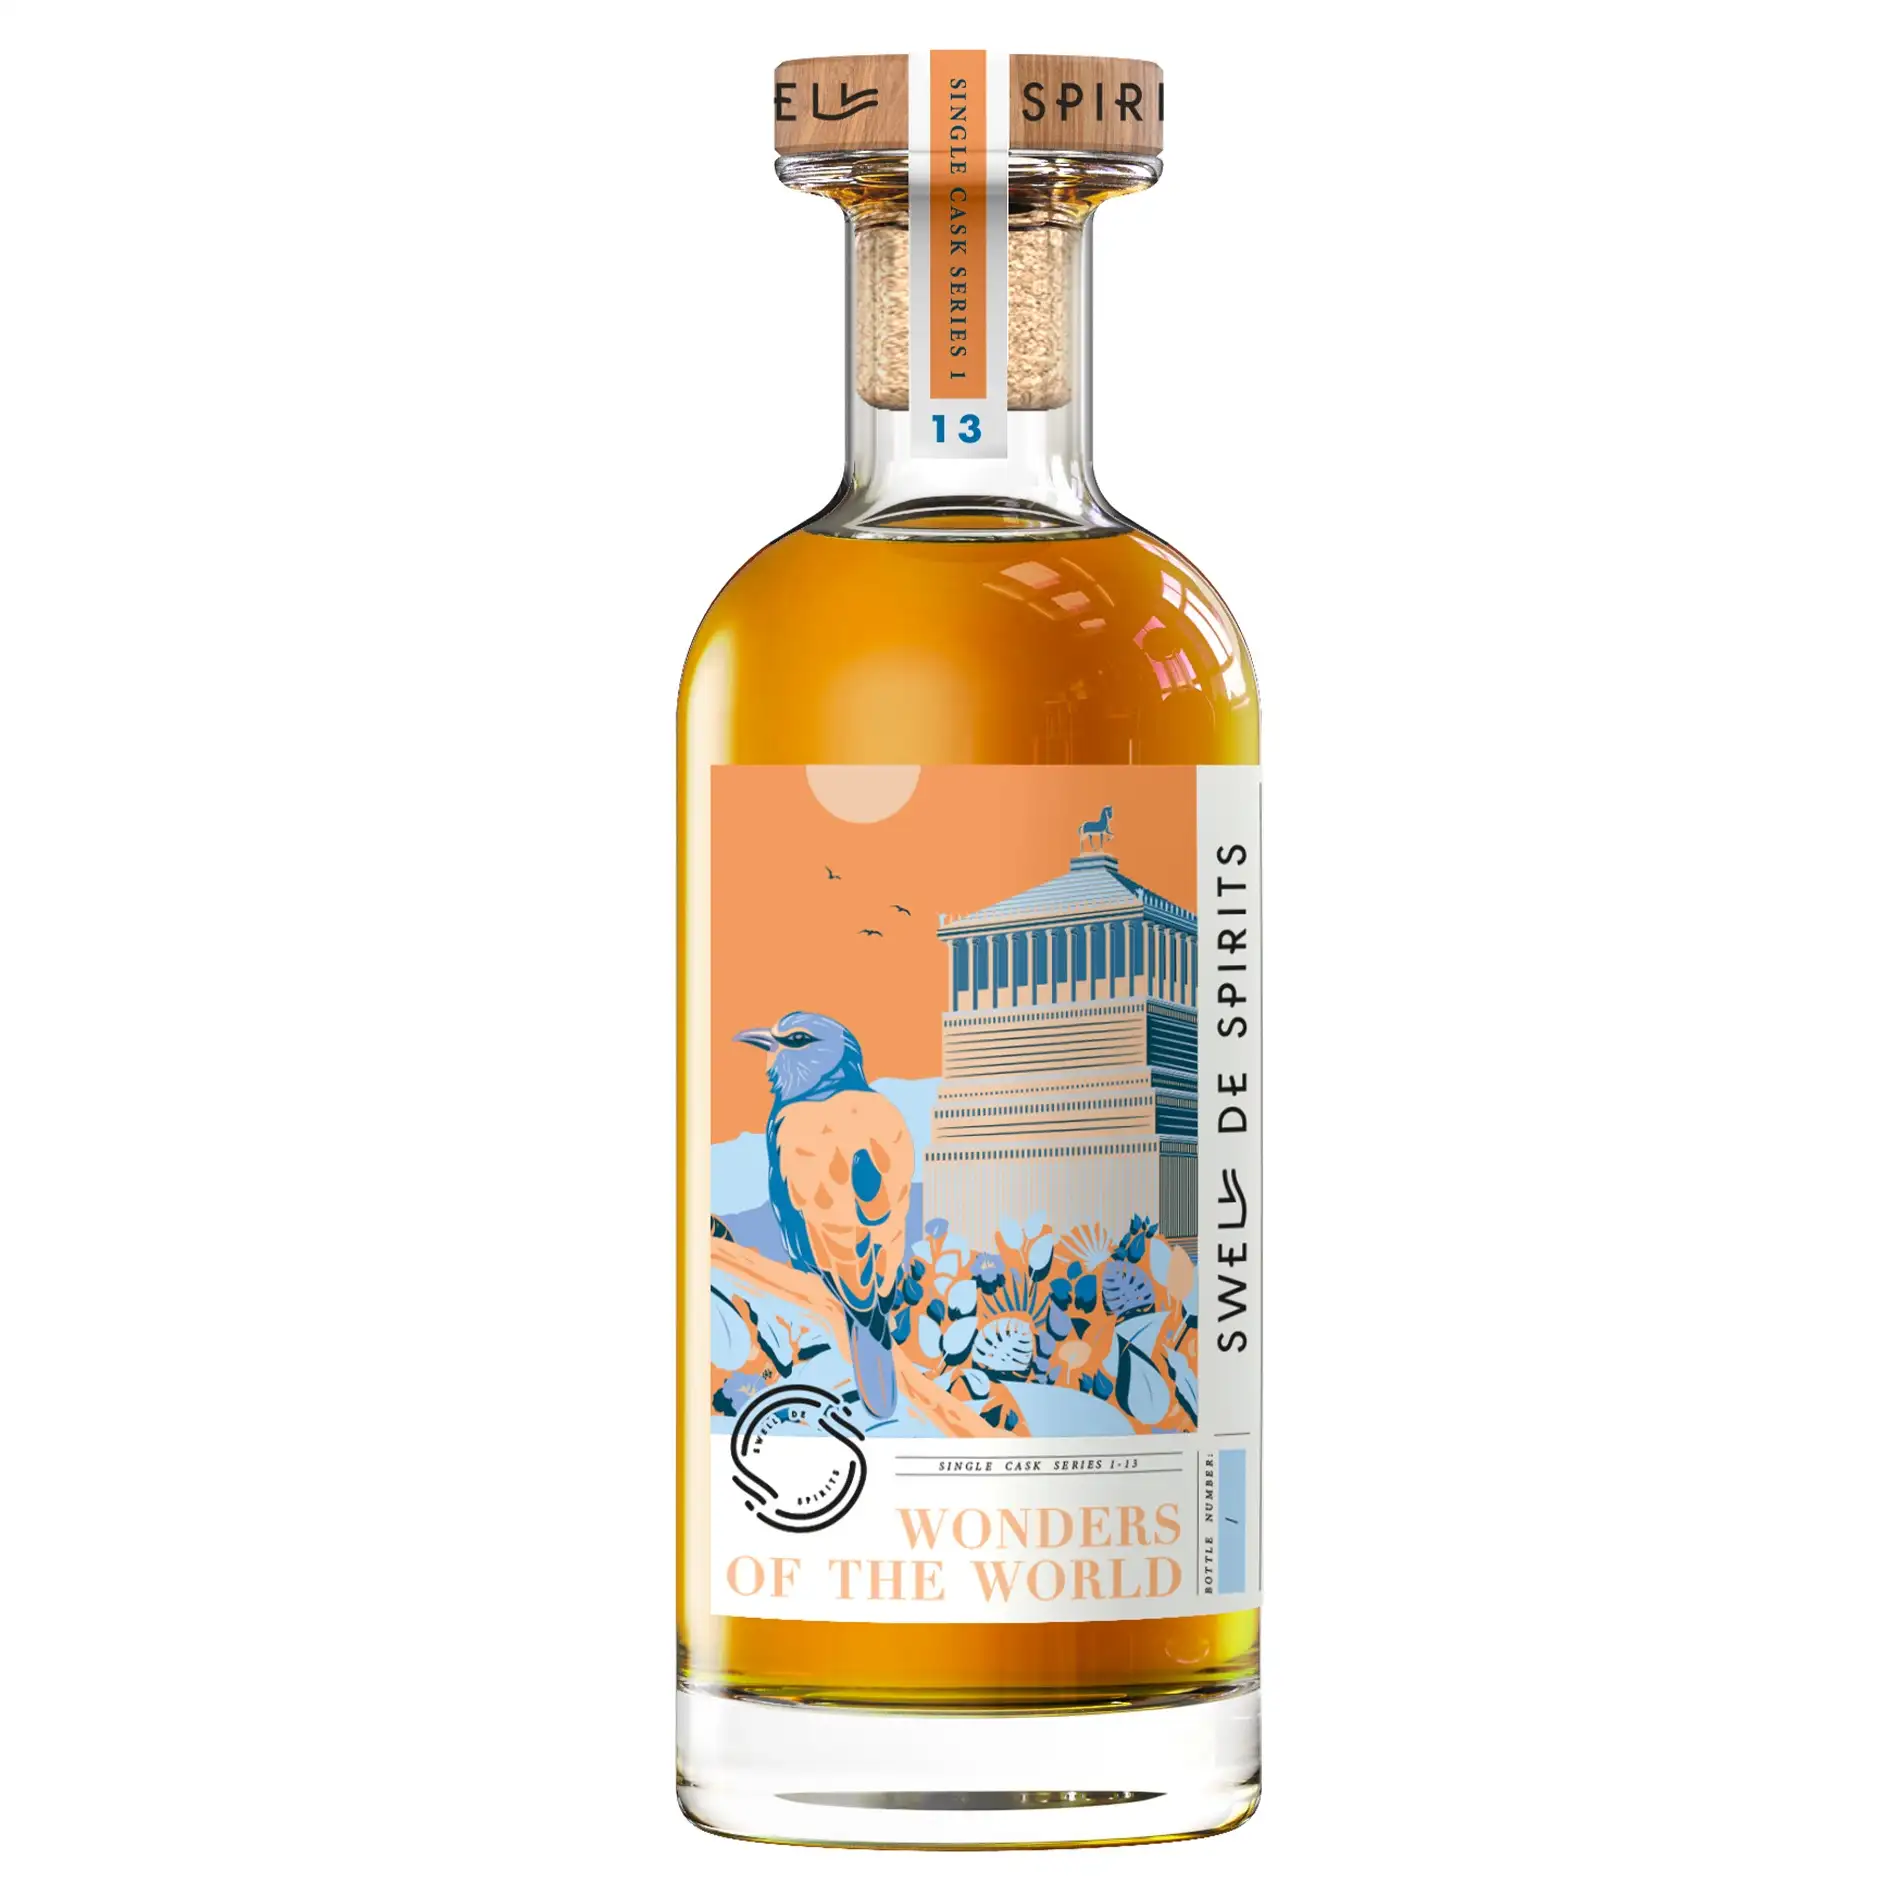 Image of the front of the bottle of the rum Wonders of the World Single Cask Series 13